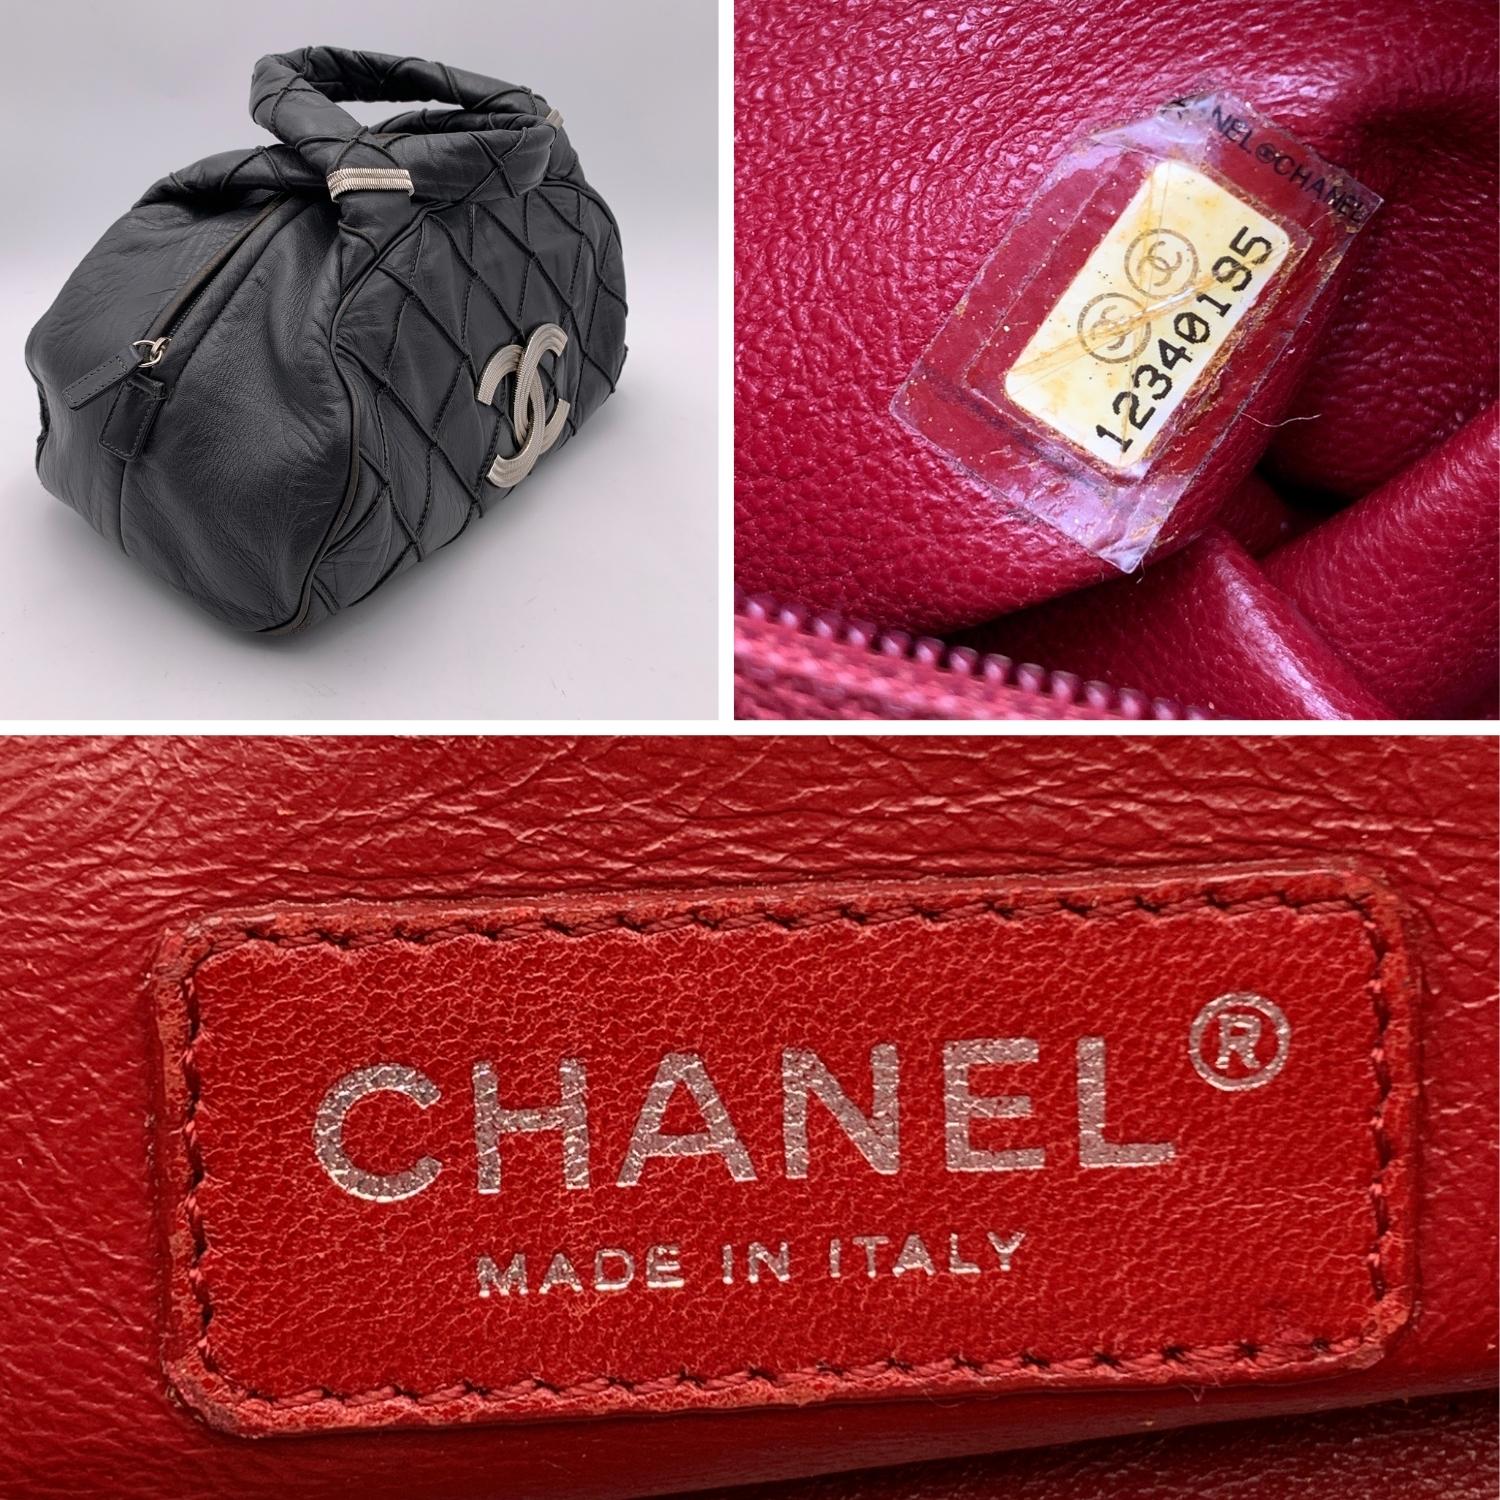 CHANEL !! Authentic Vintage Bowling Bag w/quilting and gold CC